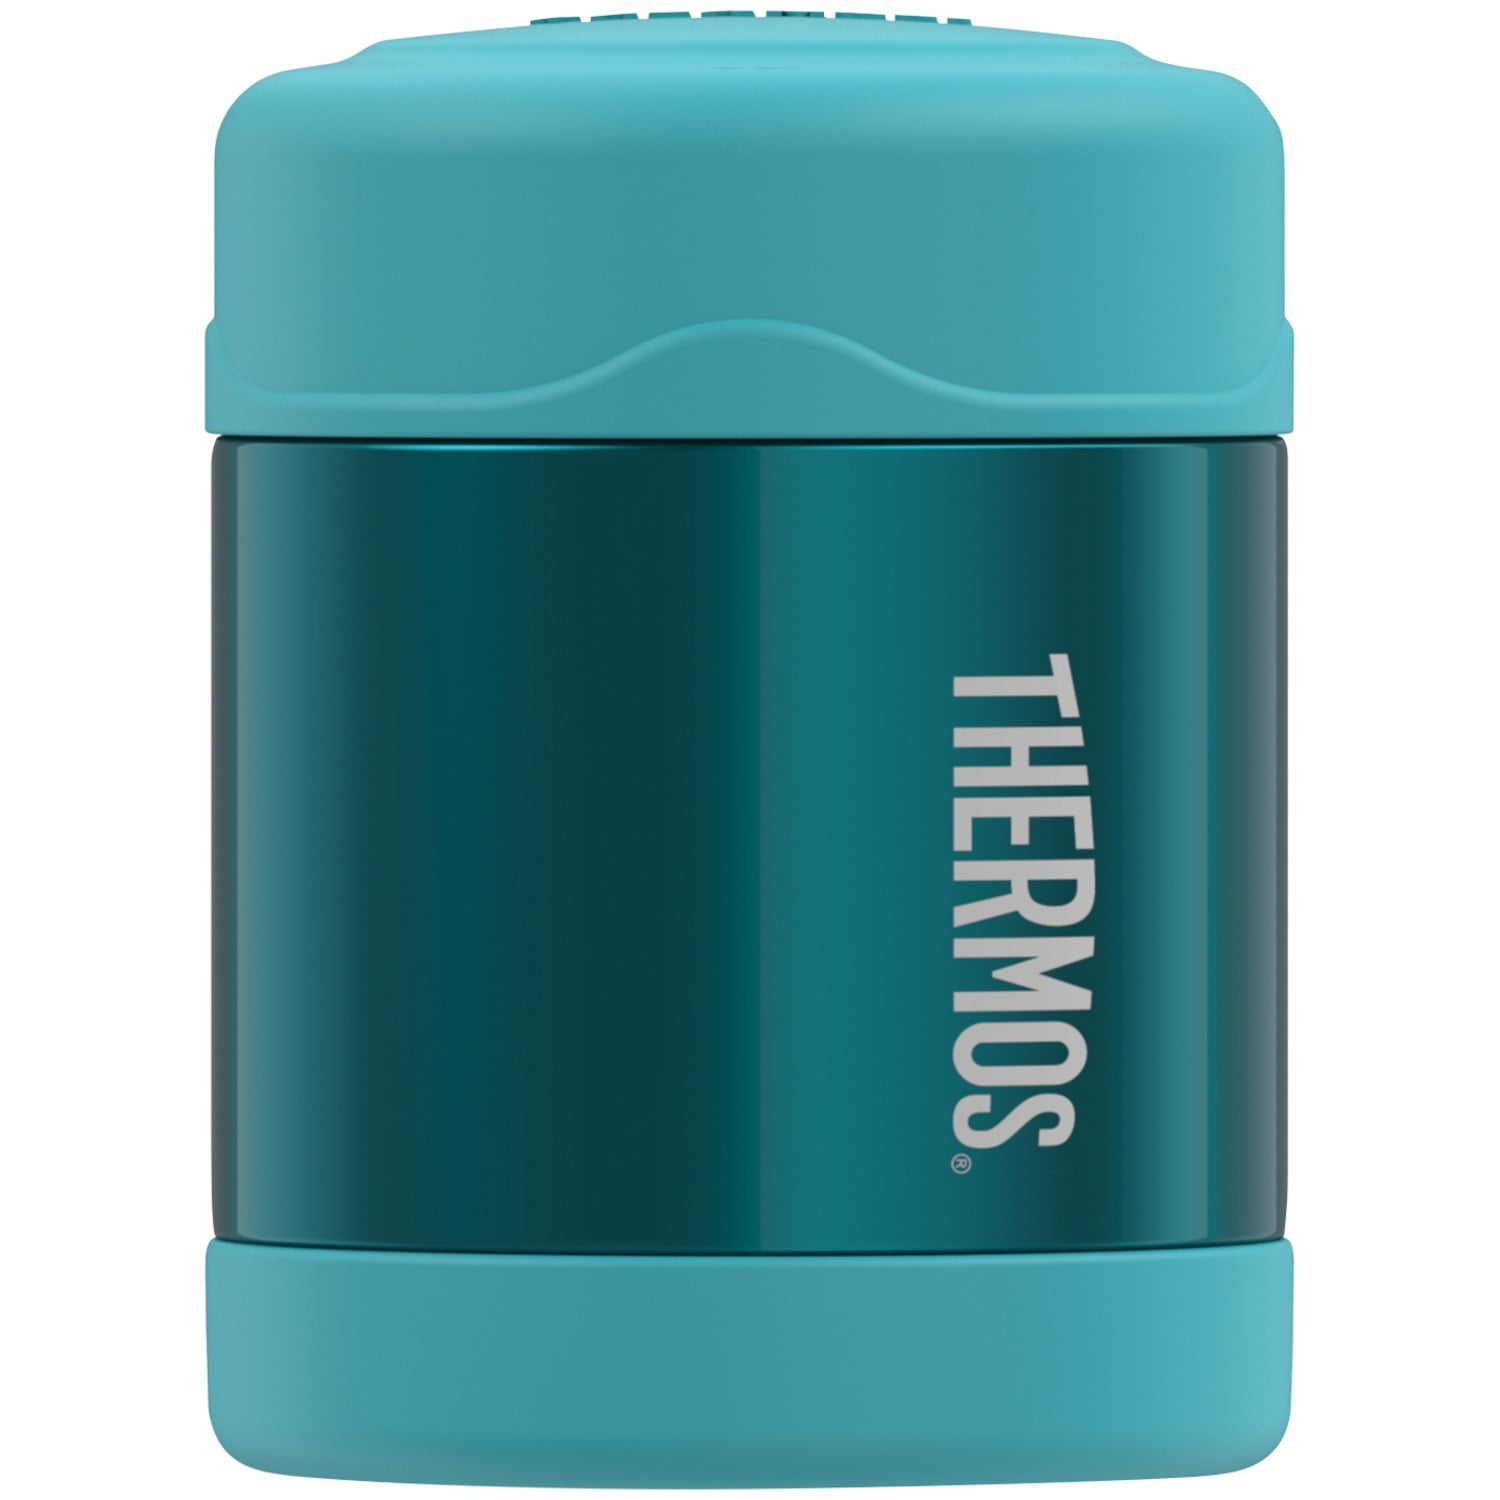 Thermos Stainless Steel Food Jar - Teal, 10 oz - Fred Meyer